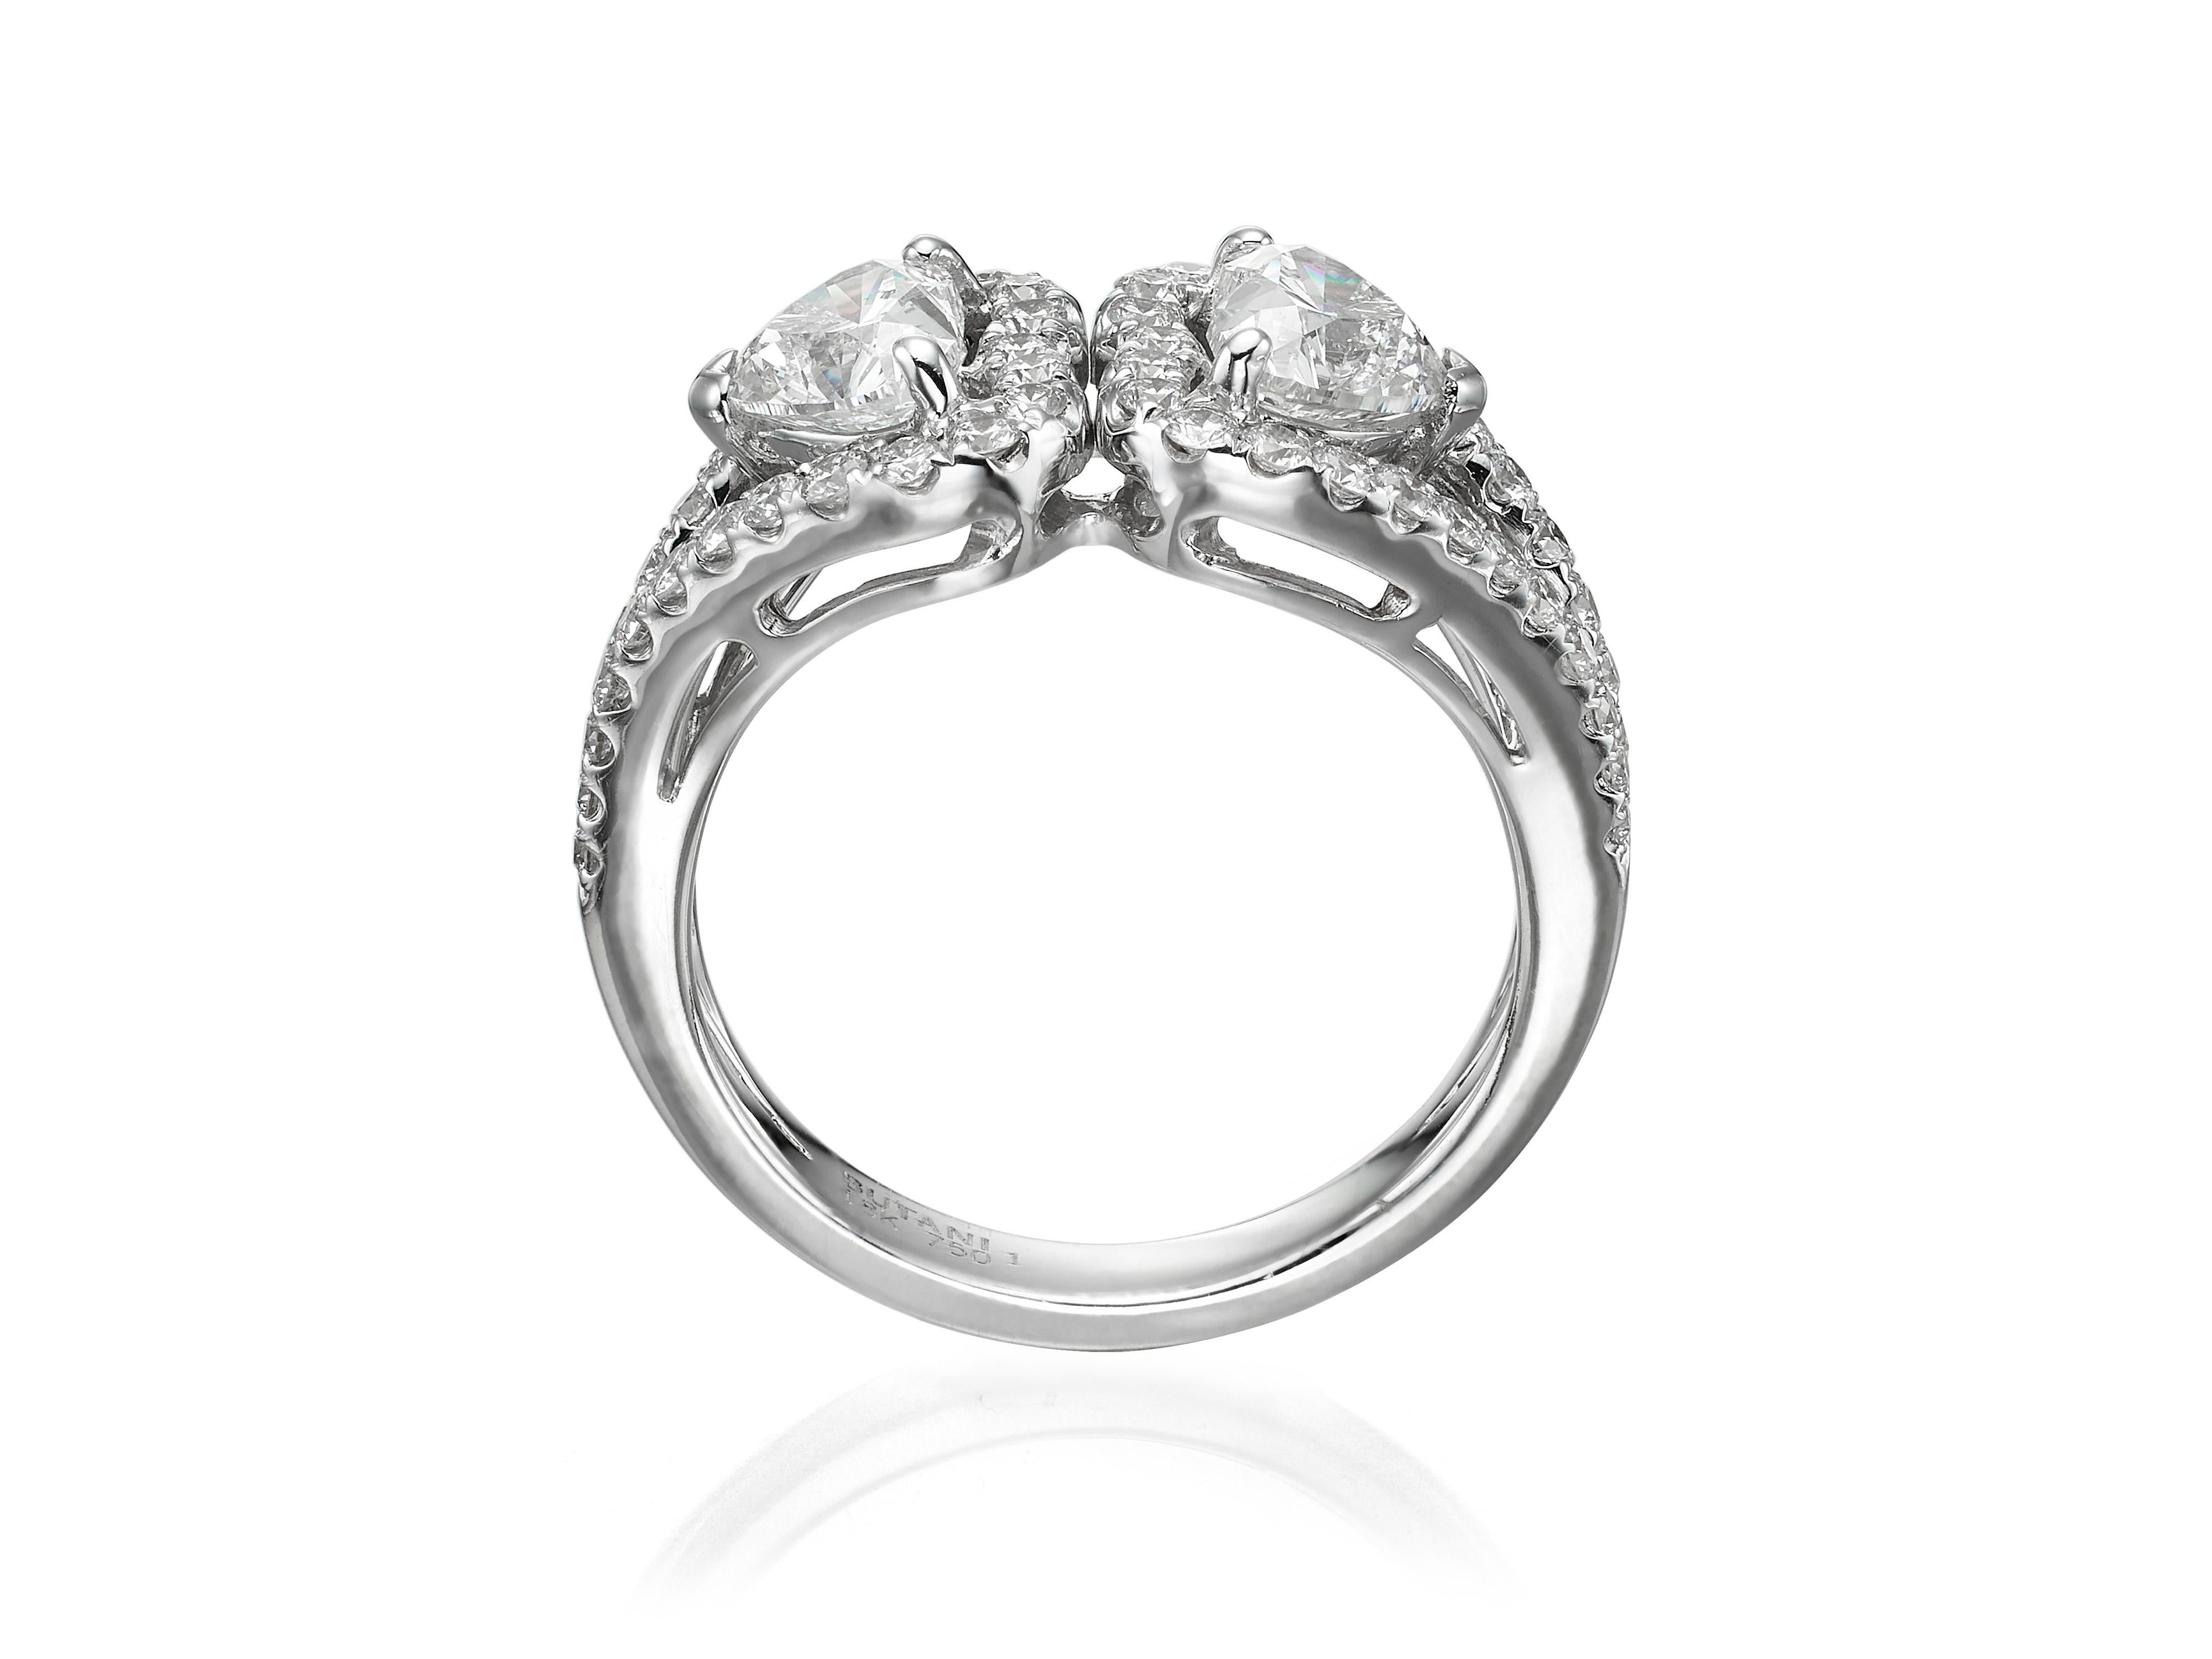 Crafted from 18K white gold, this cocktail ring features two heart shape diamonds (totaling 1.61 carats) surrounded by a halo of round diamonds (totaling 0.7 carats).  Currently a ring size US 6.5.  For other sizes, please contact